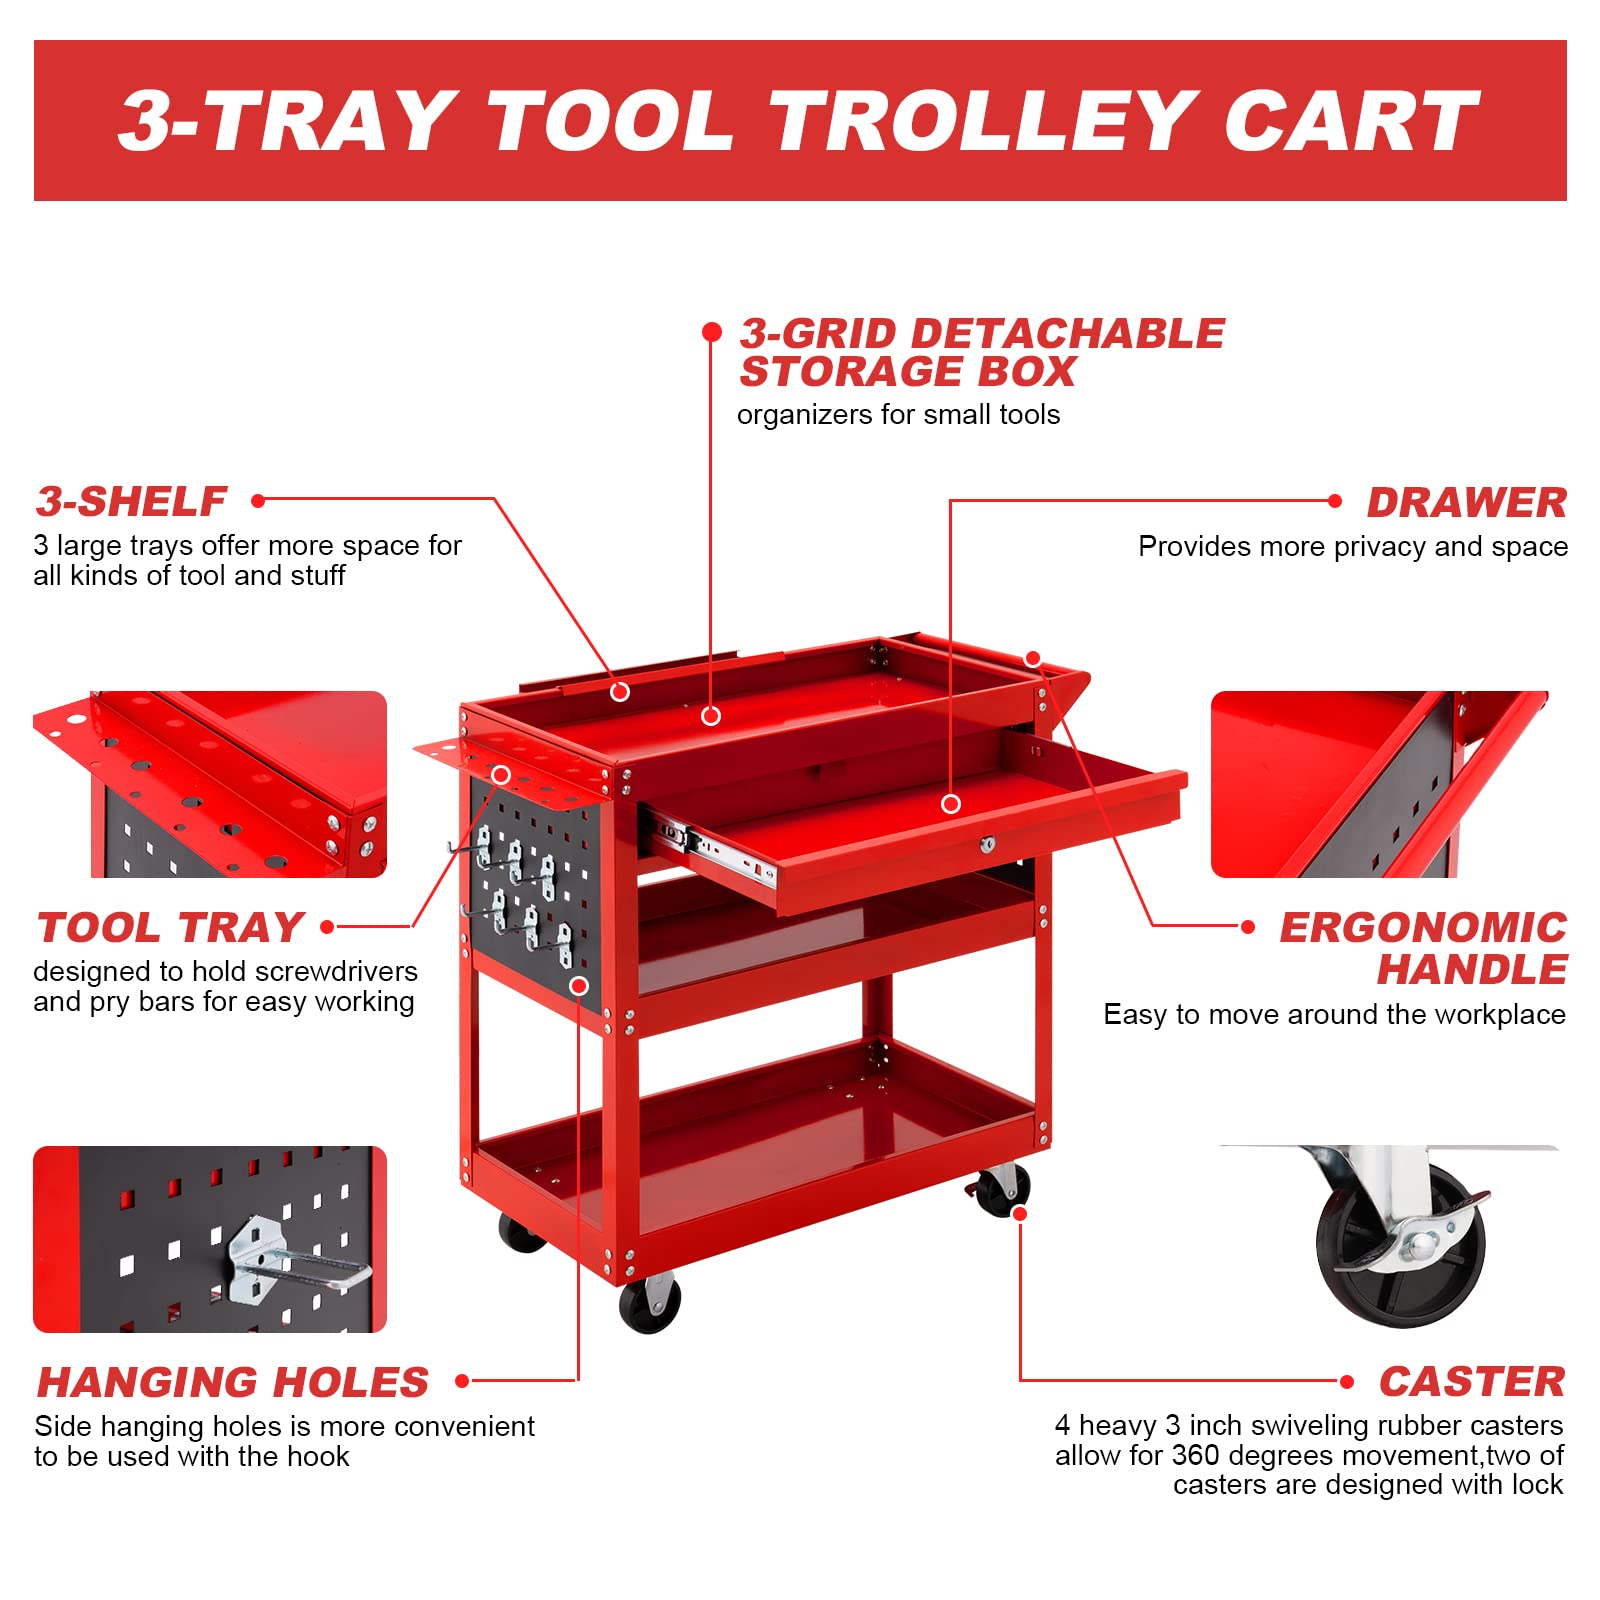 SILVEL 3 Tier Rolling Tool Cart, 330 LBS Capacity Heavy Duty Utility Cart, Industrial Commercial Service Tool Cart, Tool Organizer with Wheels, Storage Drawer, Design for Garage, Warehouse&Repair Shop